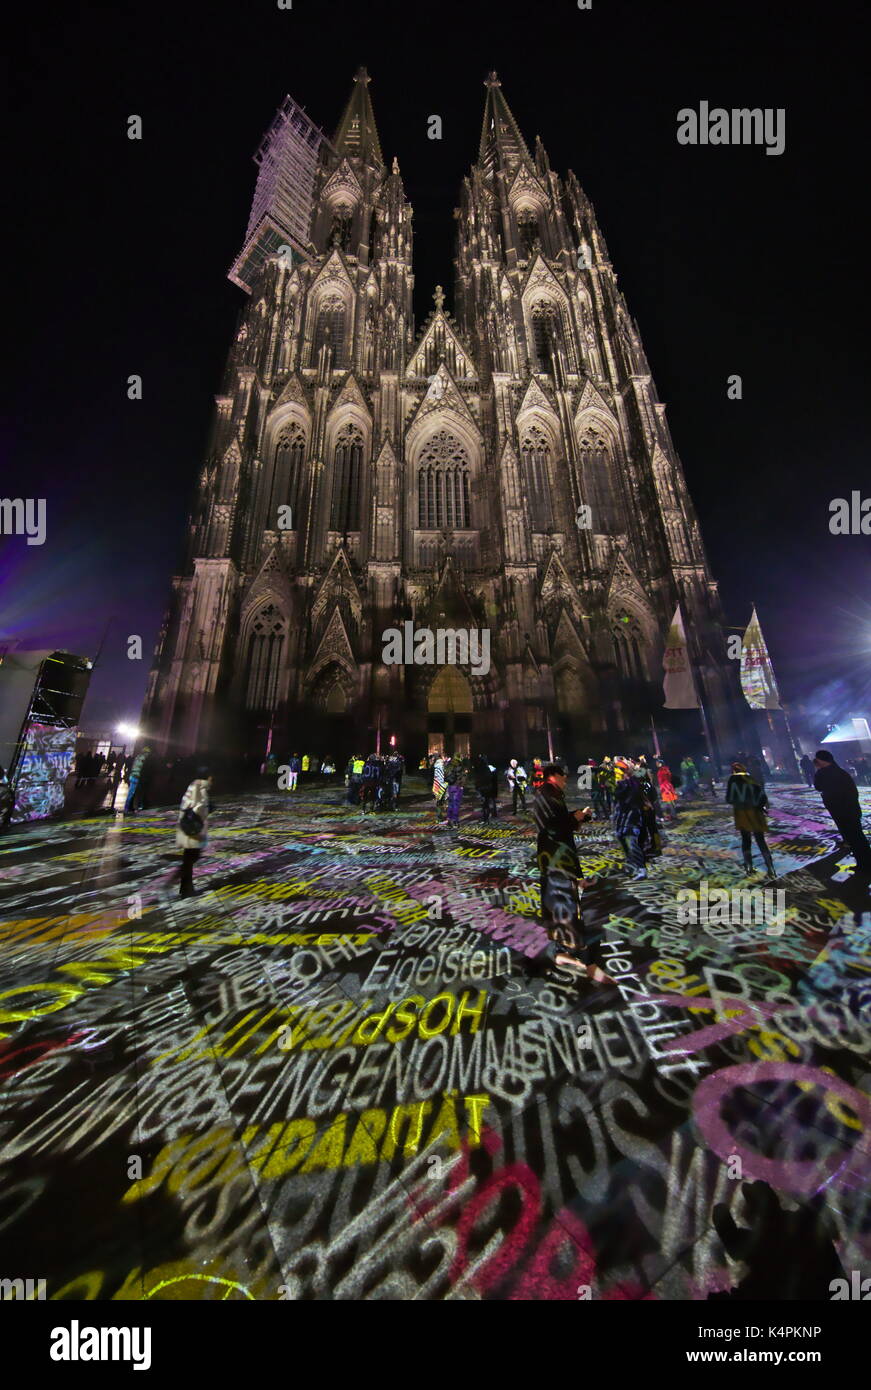 Light installation around the cologne cathedral, words and facades Stock Photo